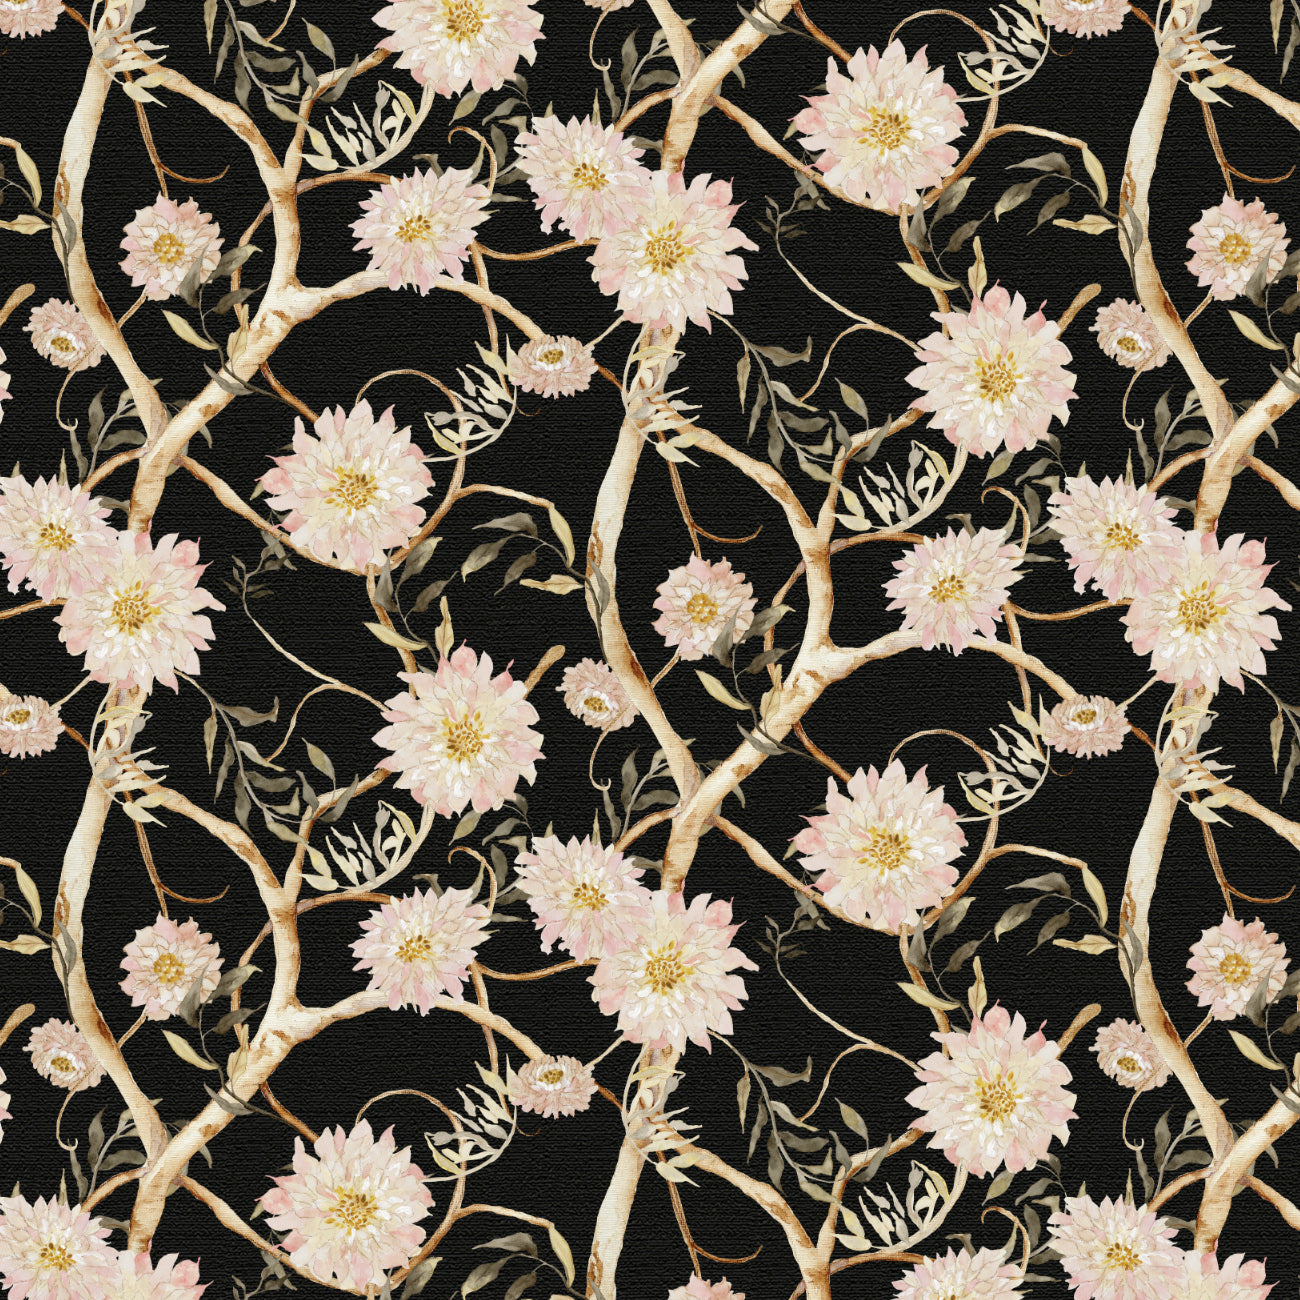 Bloom Tapestry Collection-Tangled Blooms-Black-100% Cotton 55230802-01